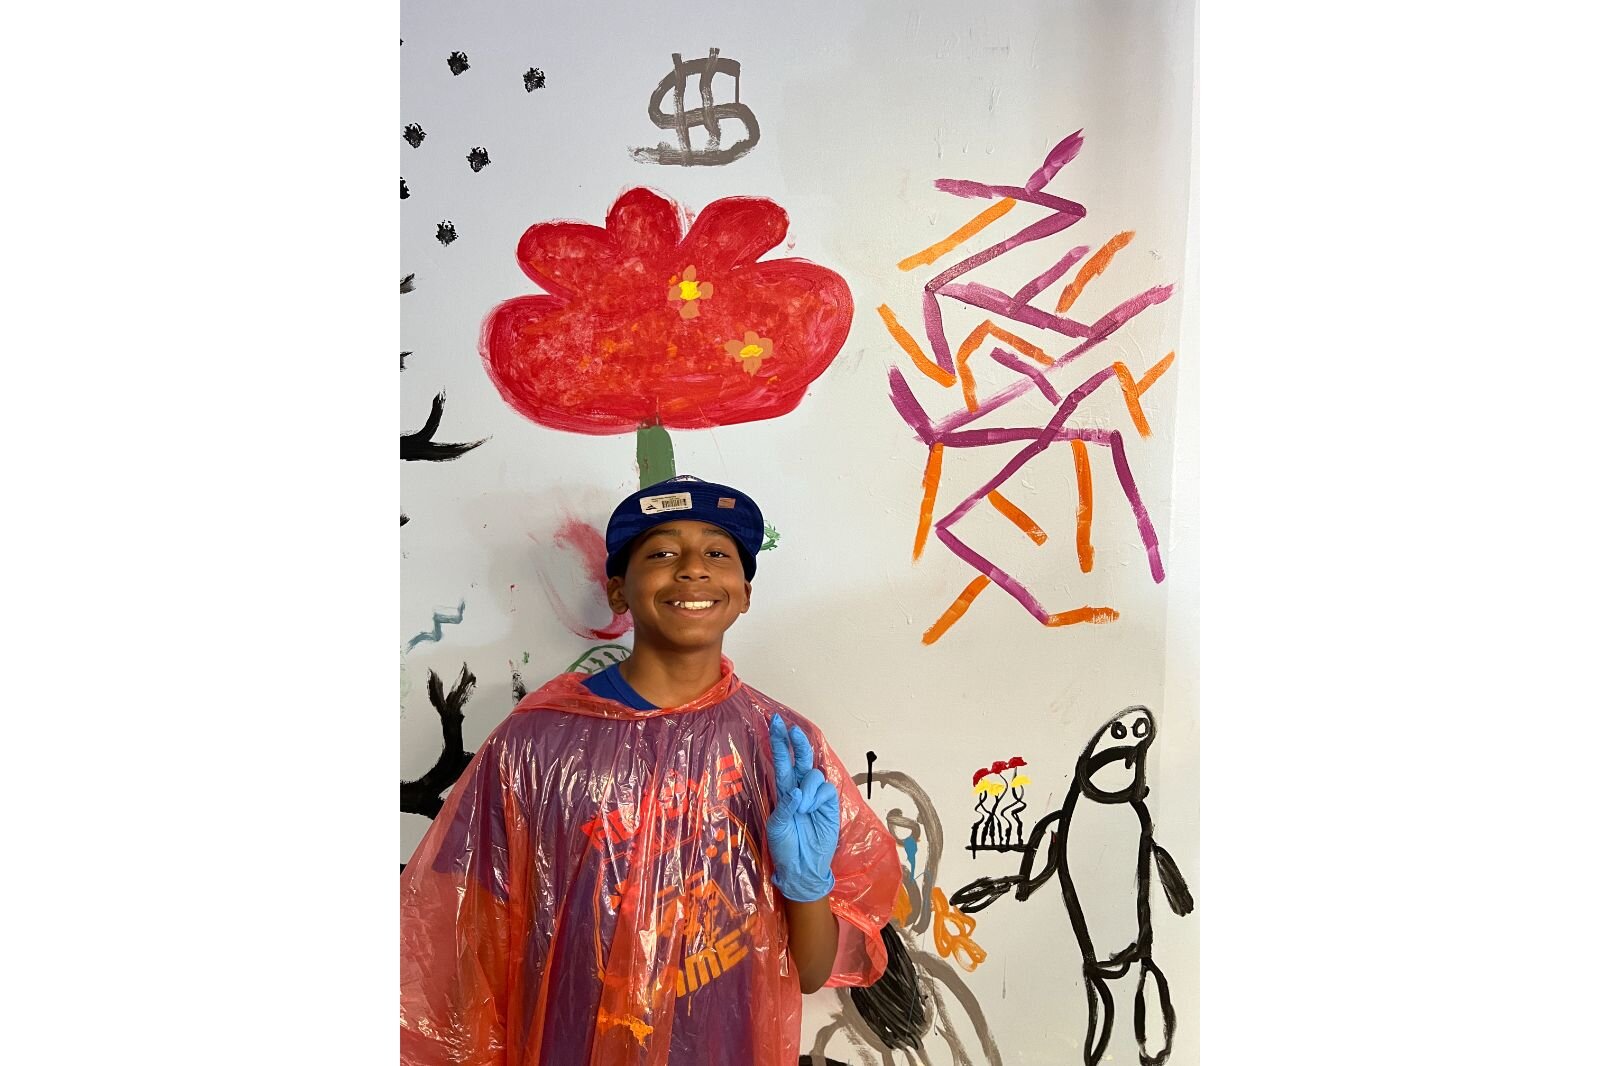 Chrus Wright poses in front of his part of the collaborative mural.